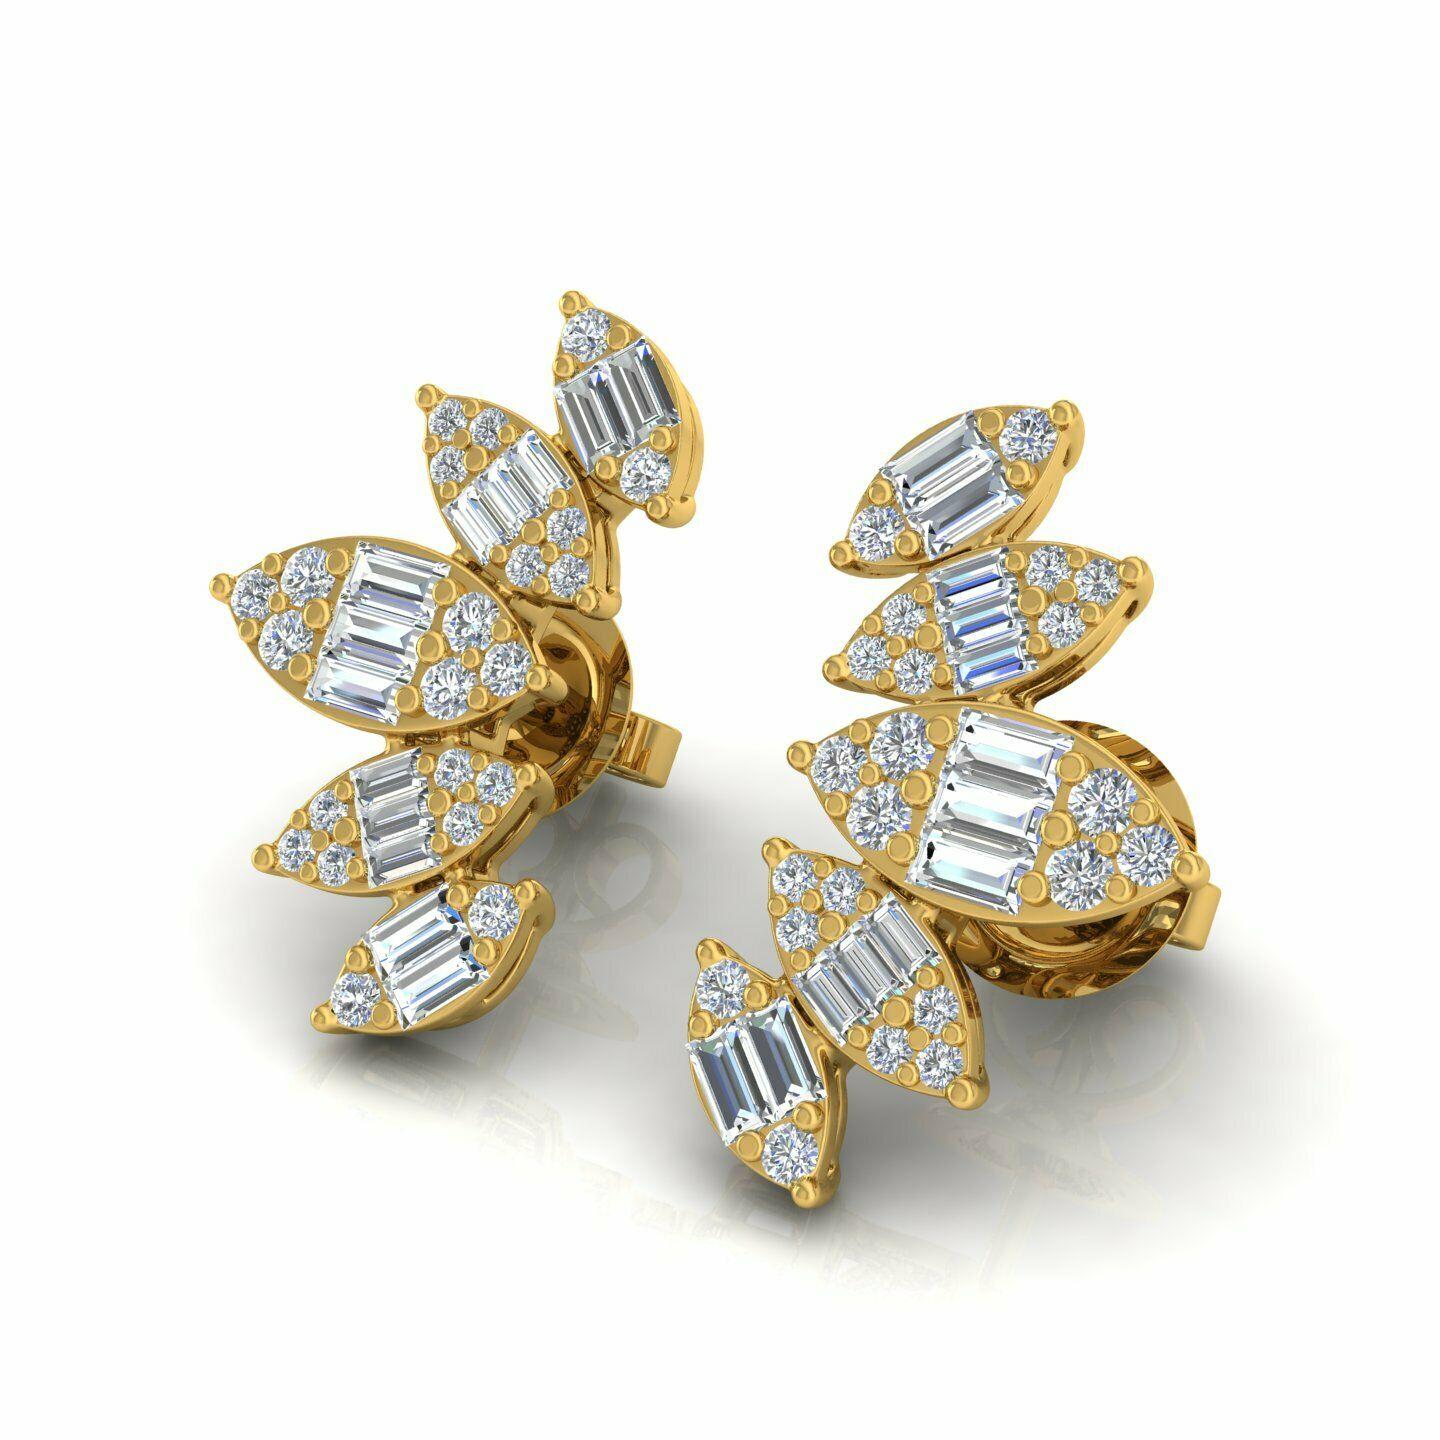 These stud earrings has been crafted from 18-karat gold and hand set with 1.35 carats of diamonds. Available in white, rose and yellow gold.  

FOLLOW MEGHNA JEWELS storefront to view the latest collection & exclusive pieces. Meghna Jewels is